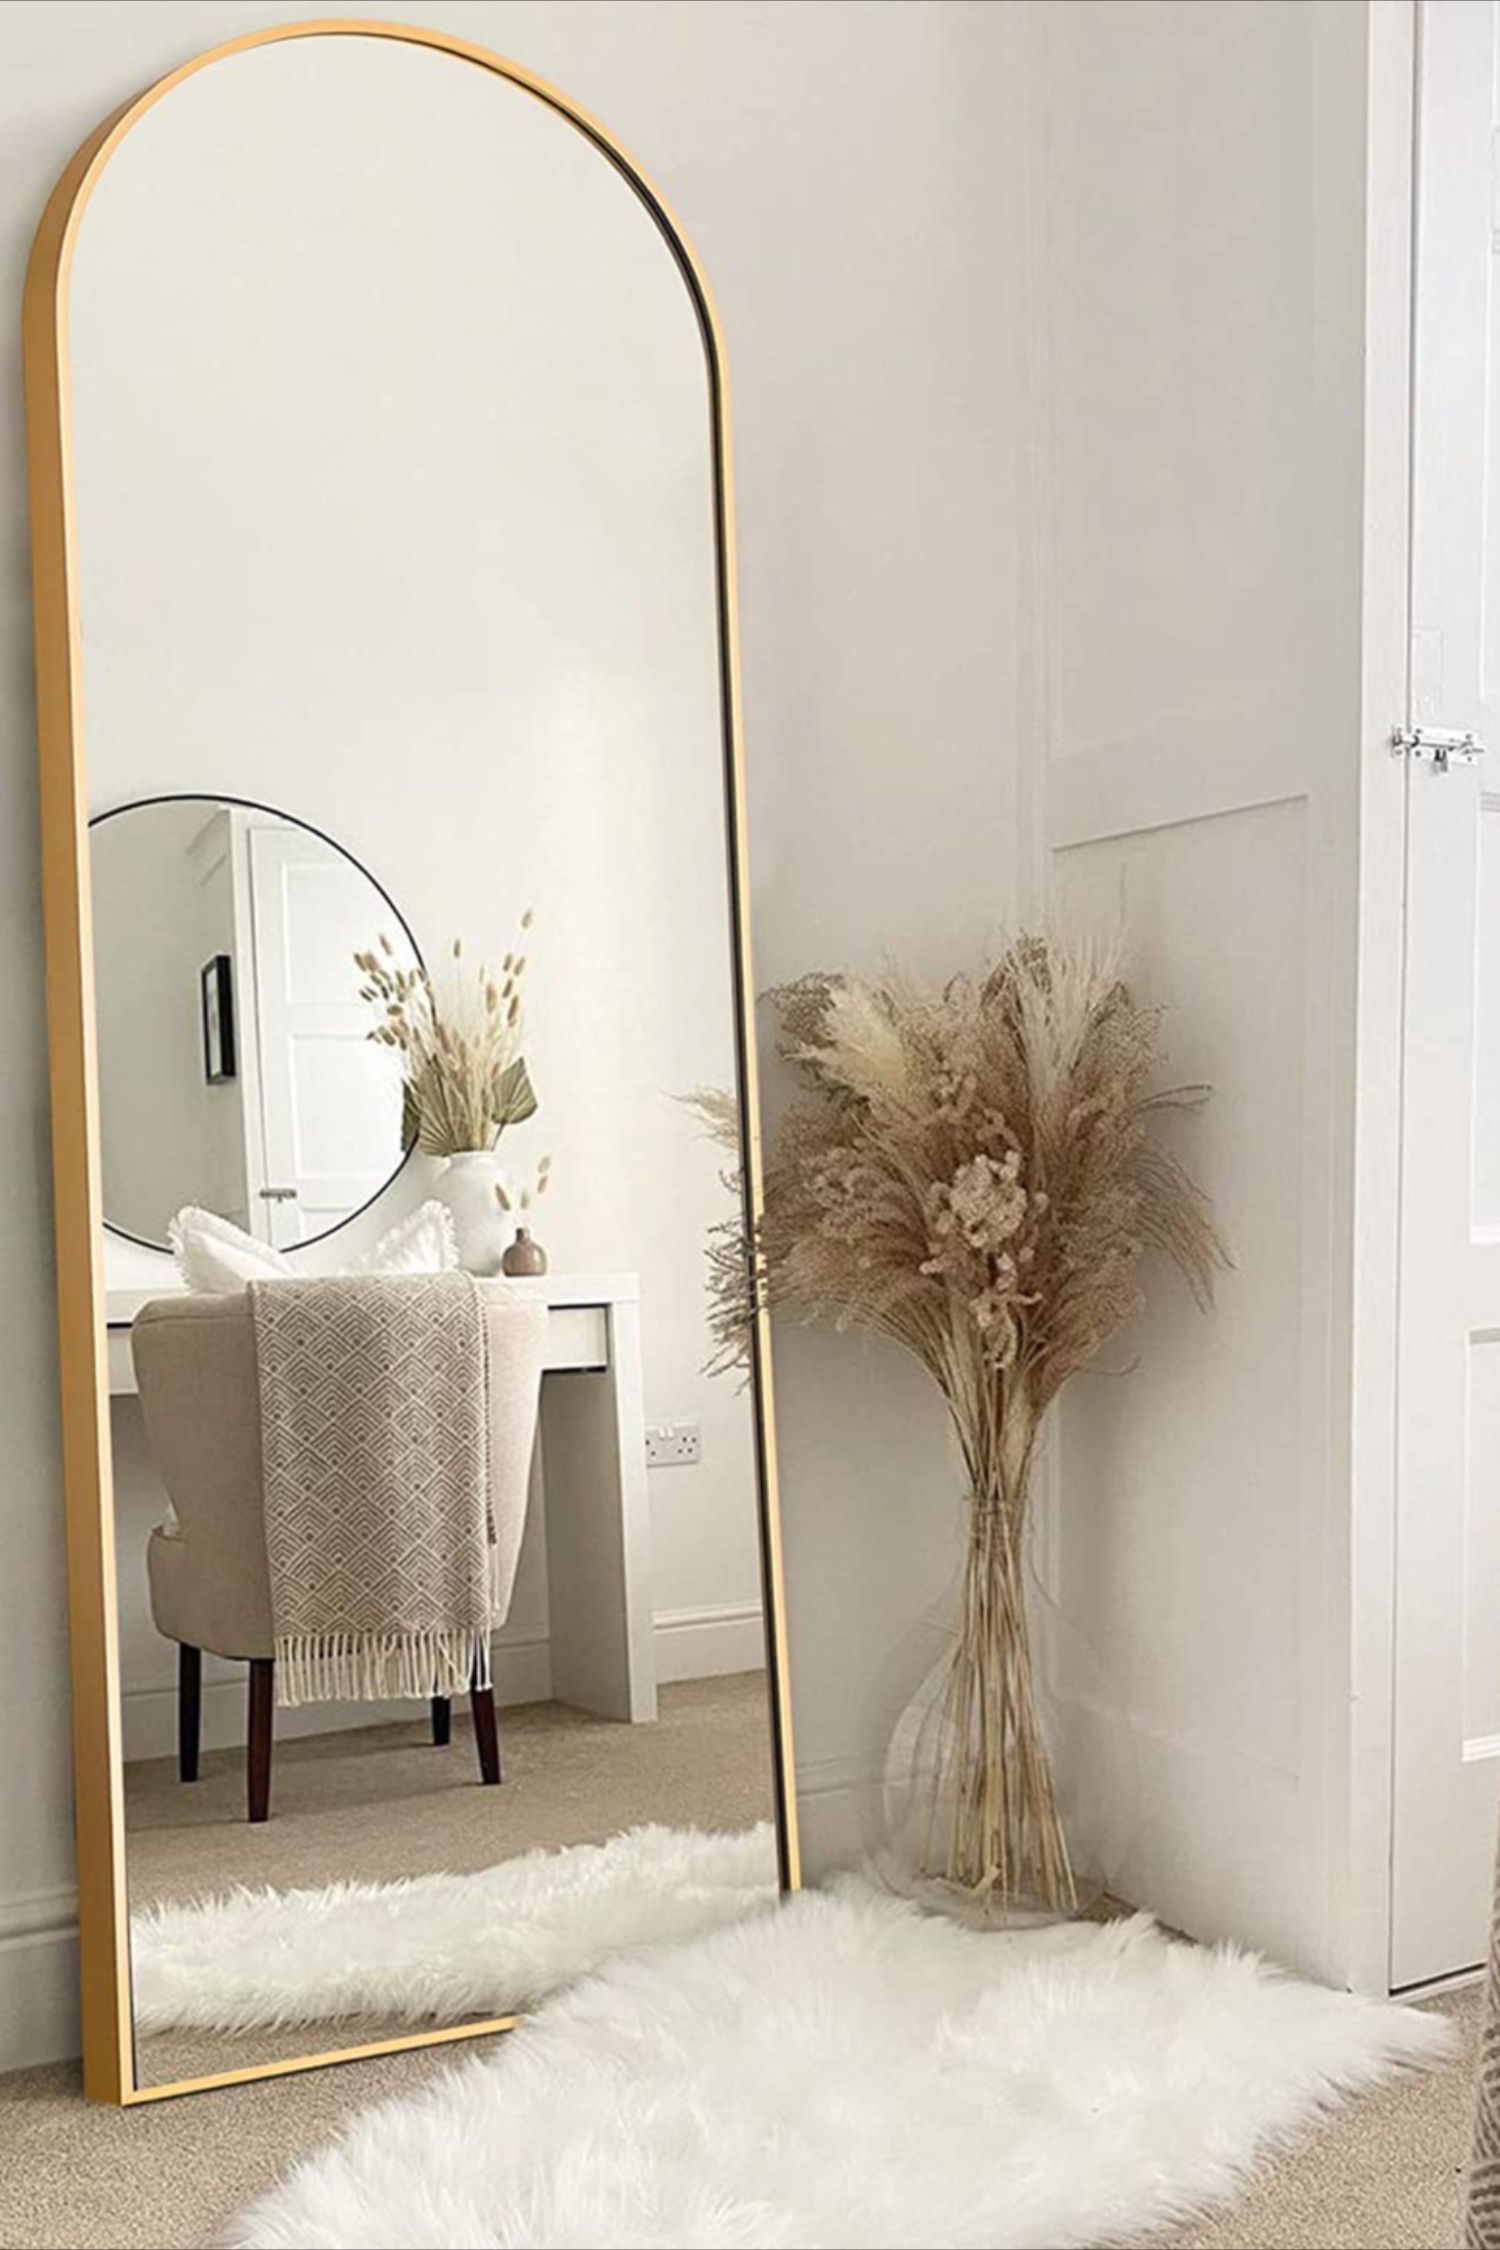 Bedroom Mirrors : The Best Bedroom Mirrors for Your Home Décor and Function